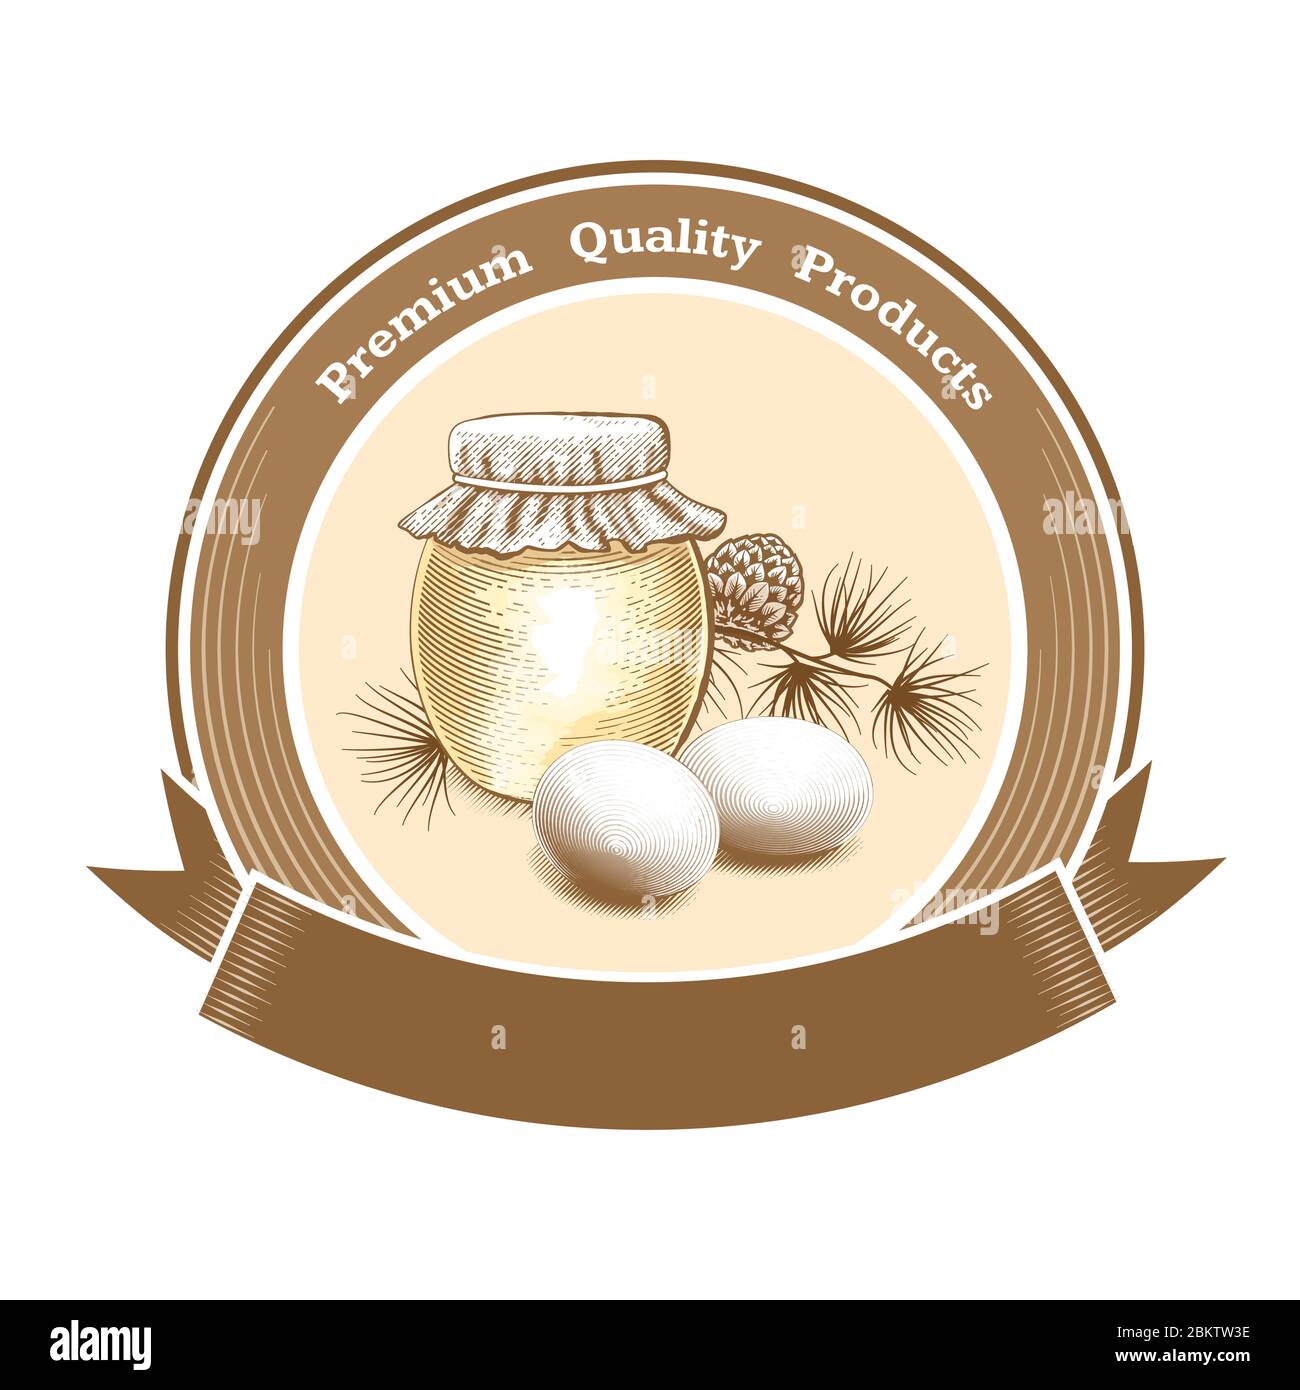 Vintage label for local premium quality products Stock Vector